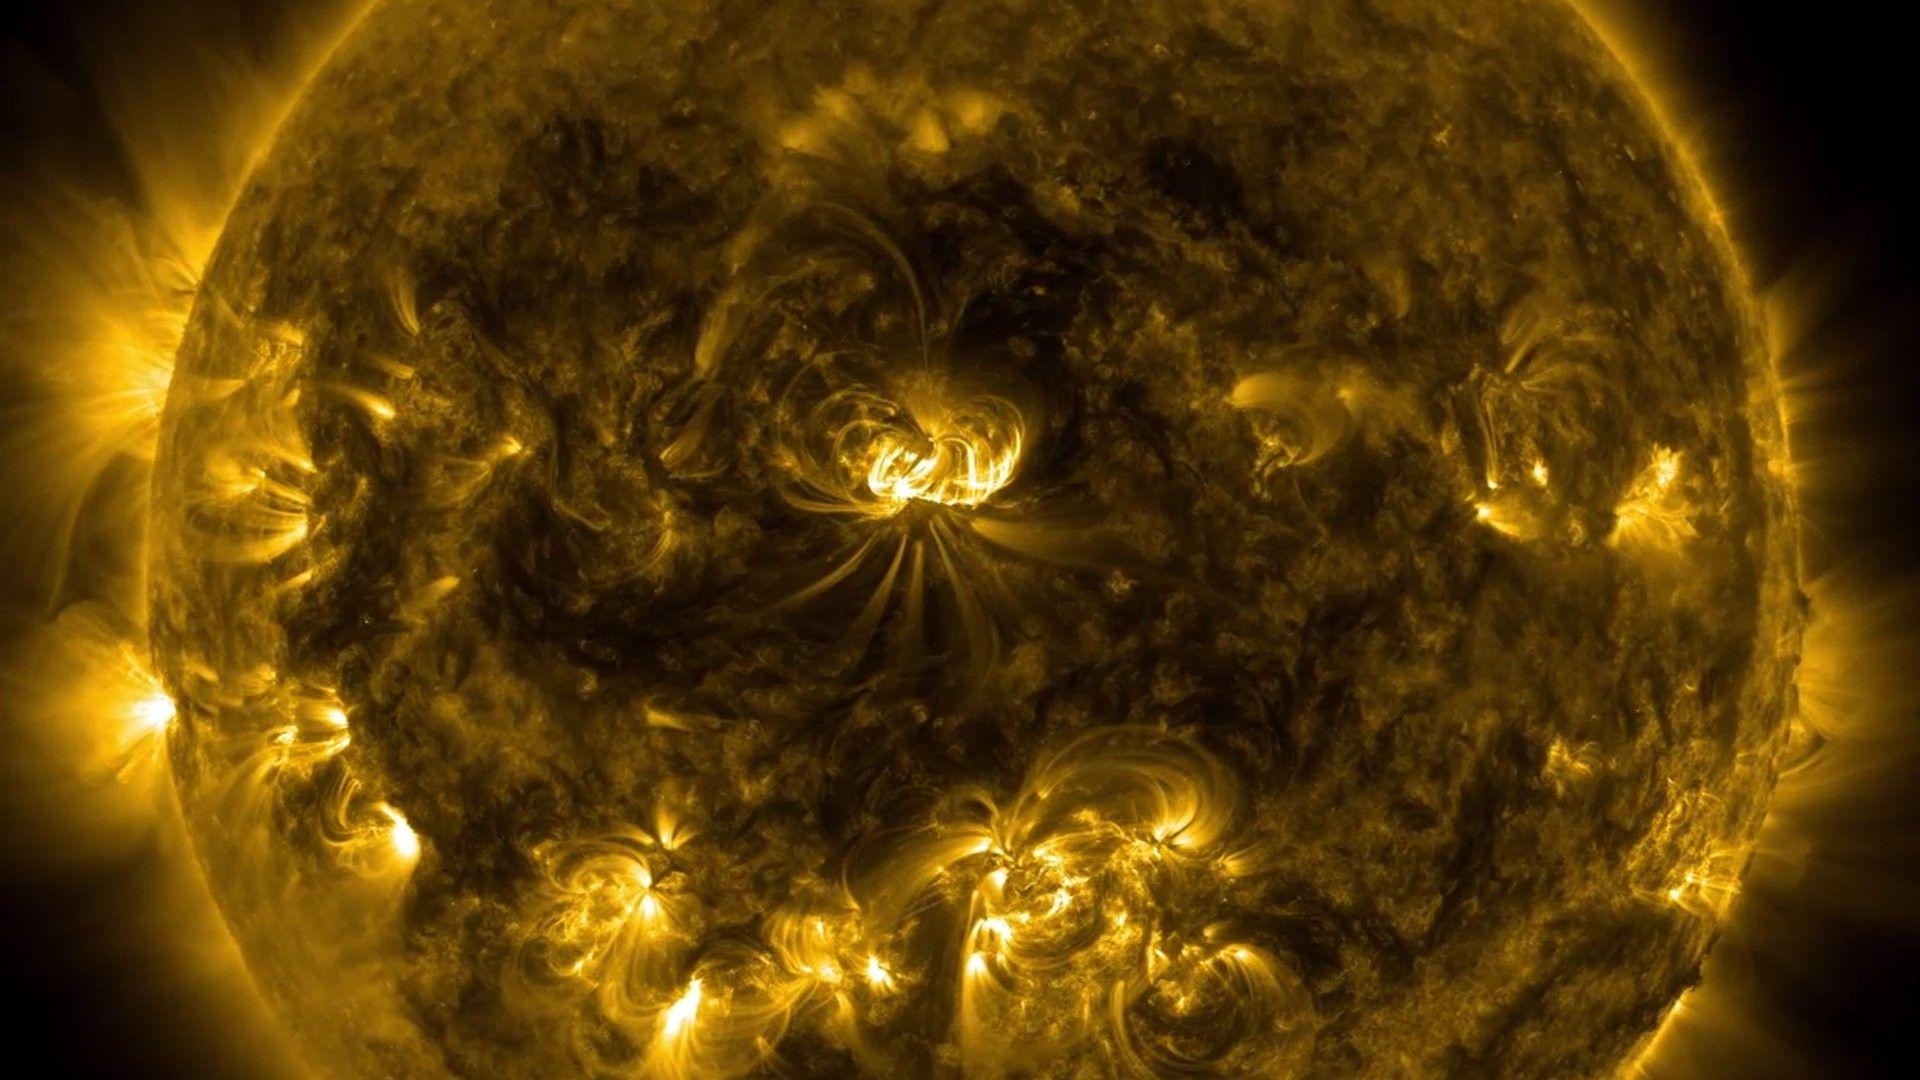 Space: Sun Psychedelic Solar Star Fire Flare Space Storm 1920x1080